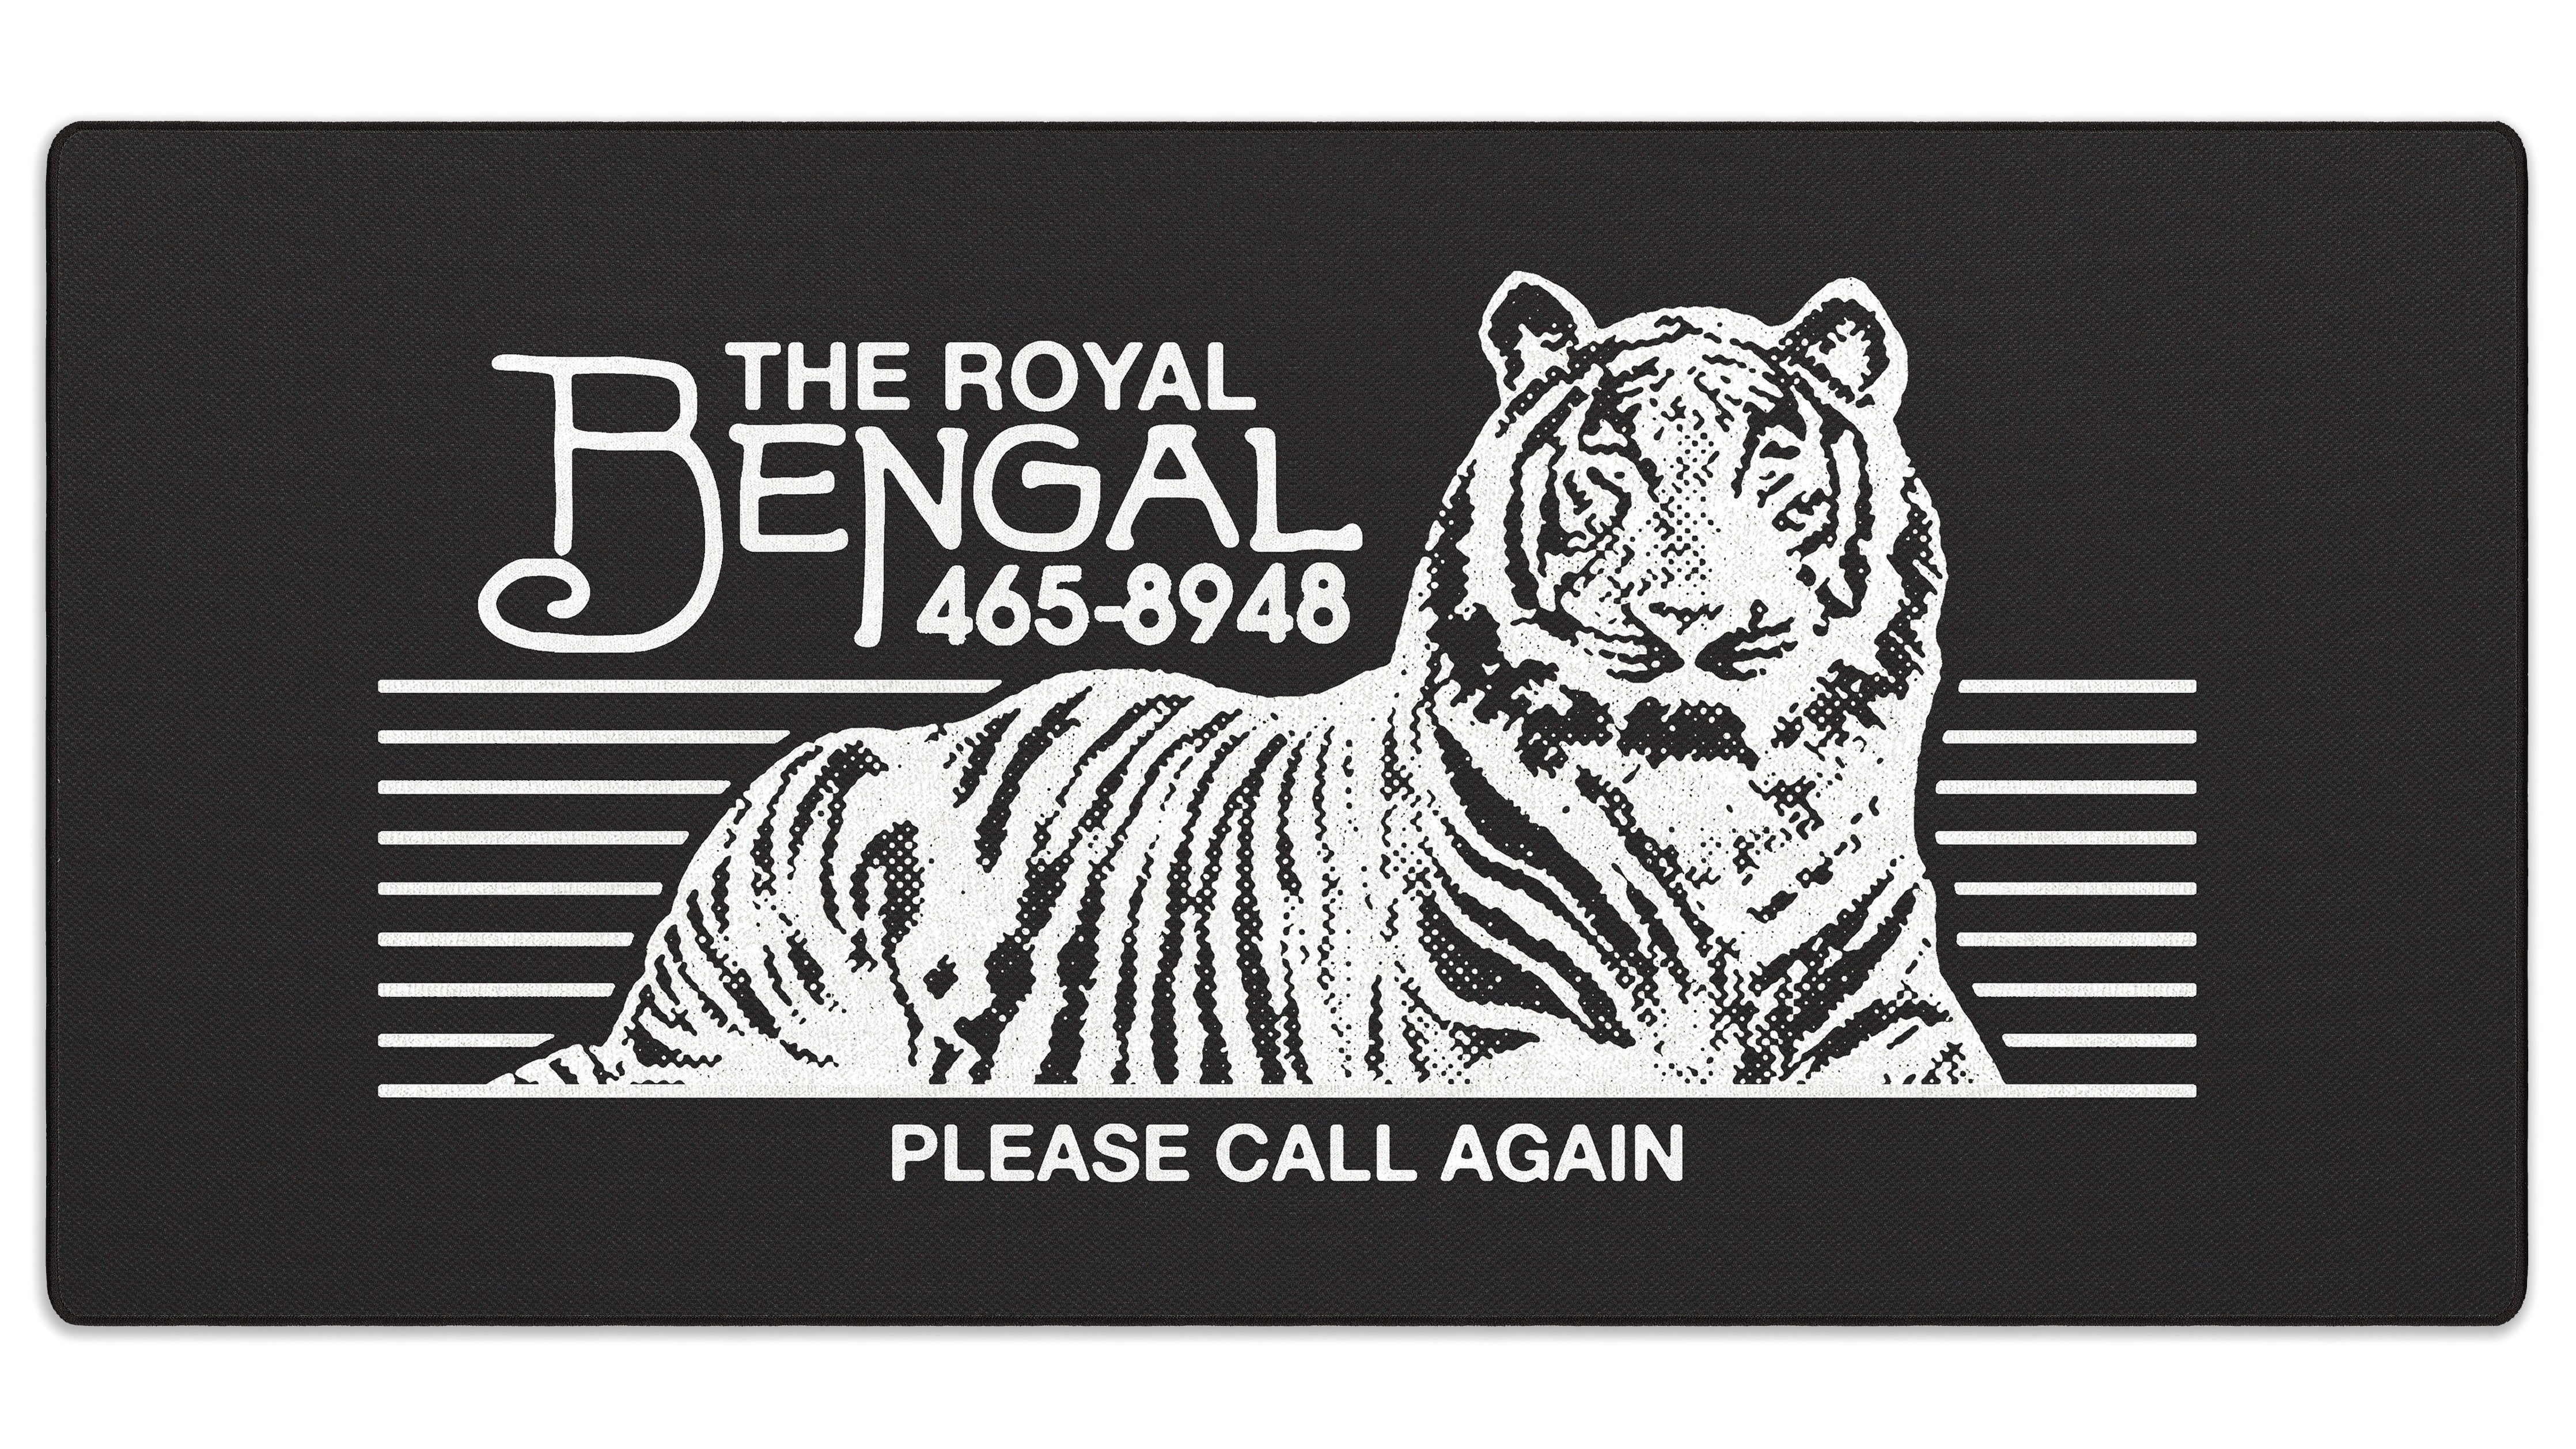 The Royal Bengal by OZGMX - The Mousepad Company